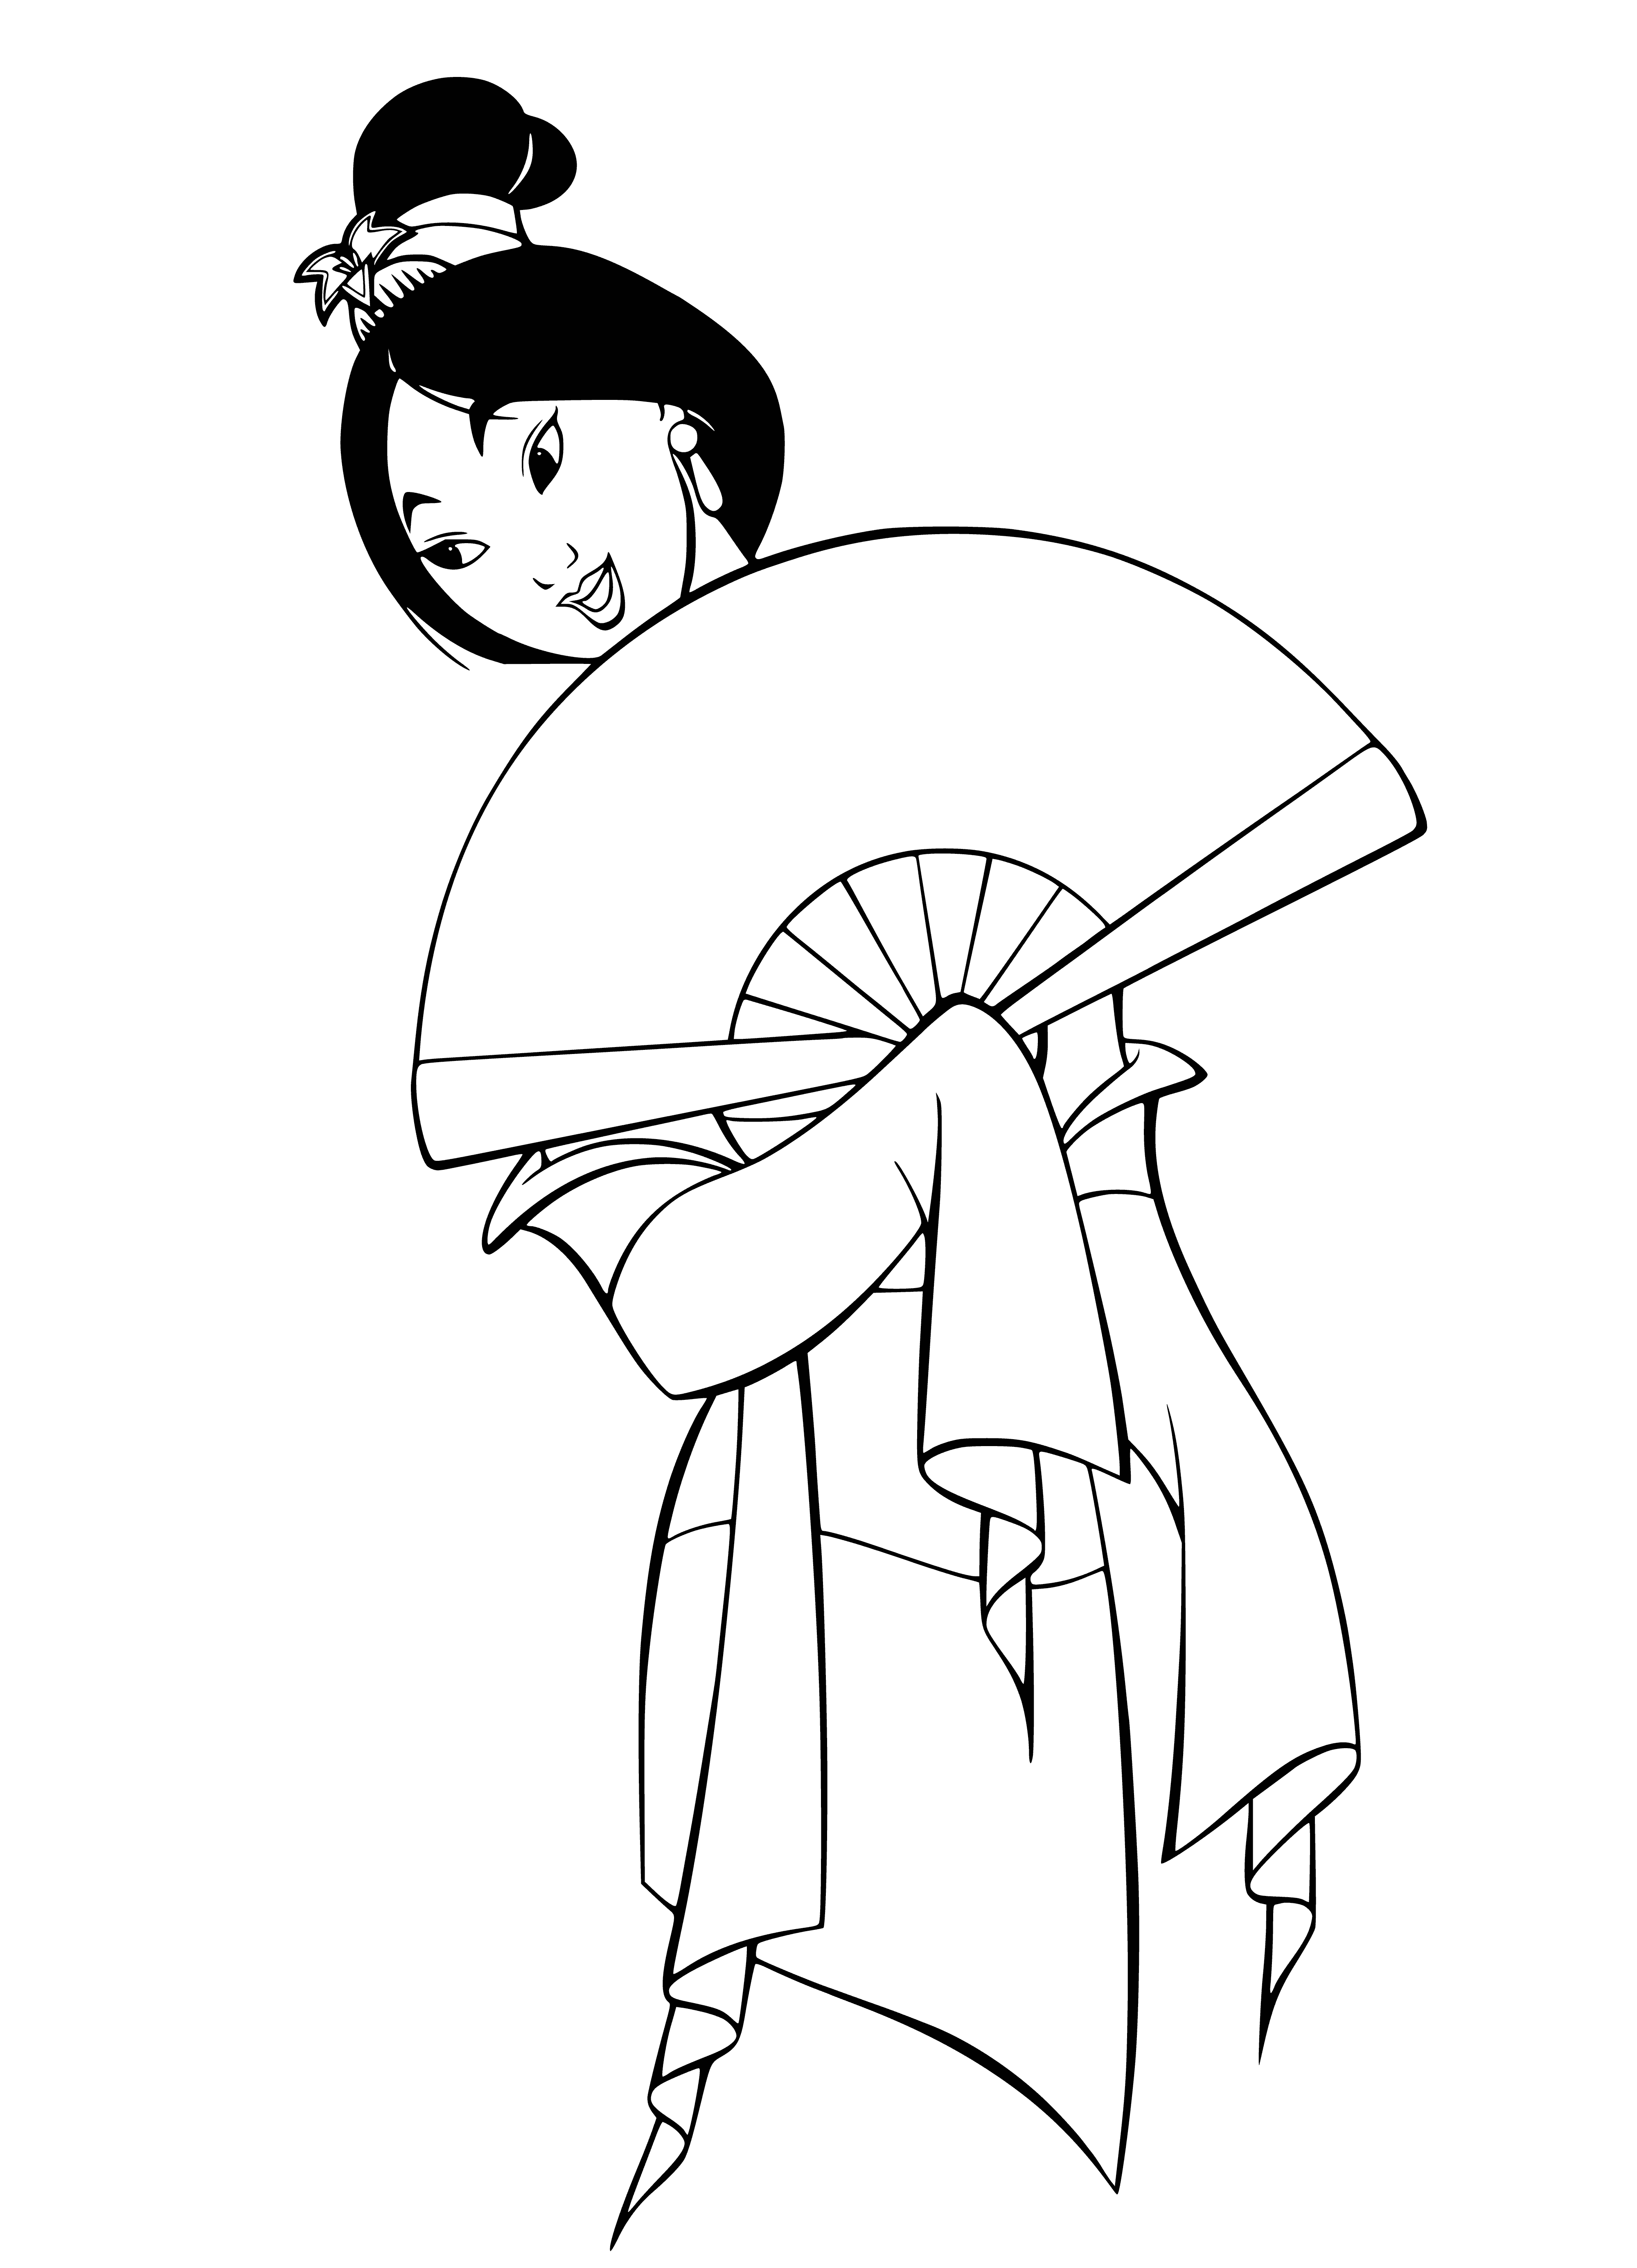 coloring page: => Woman in Chinese dress holds fan, looks determined.